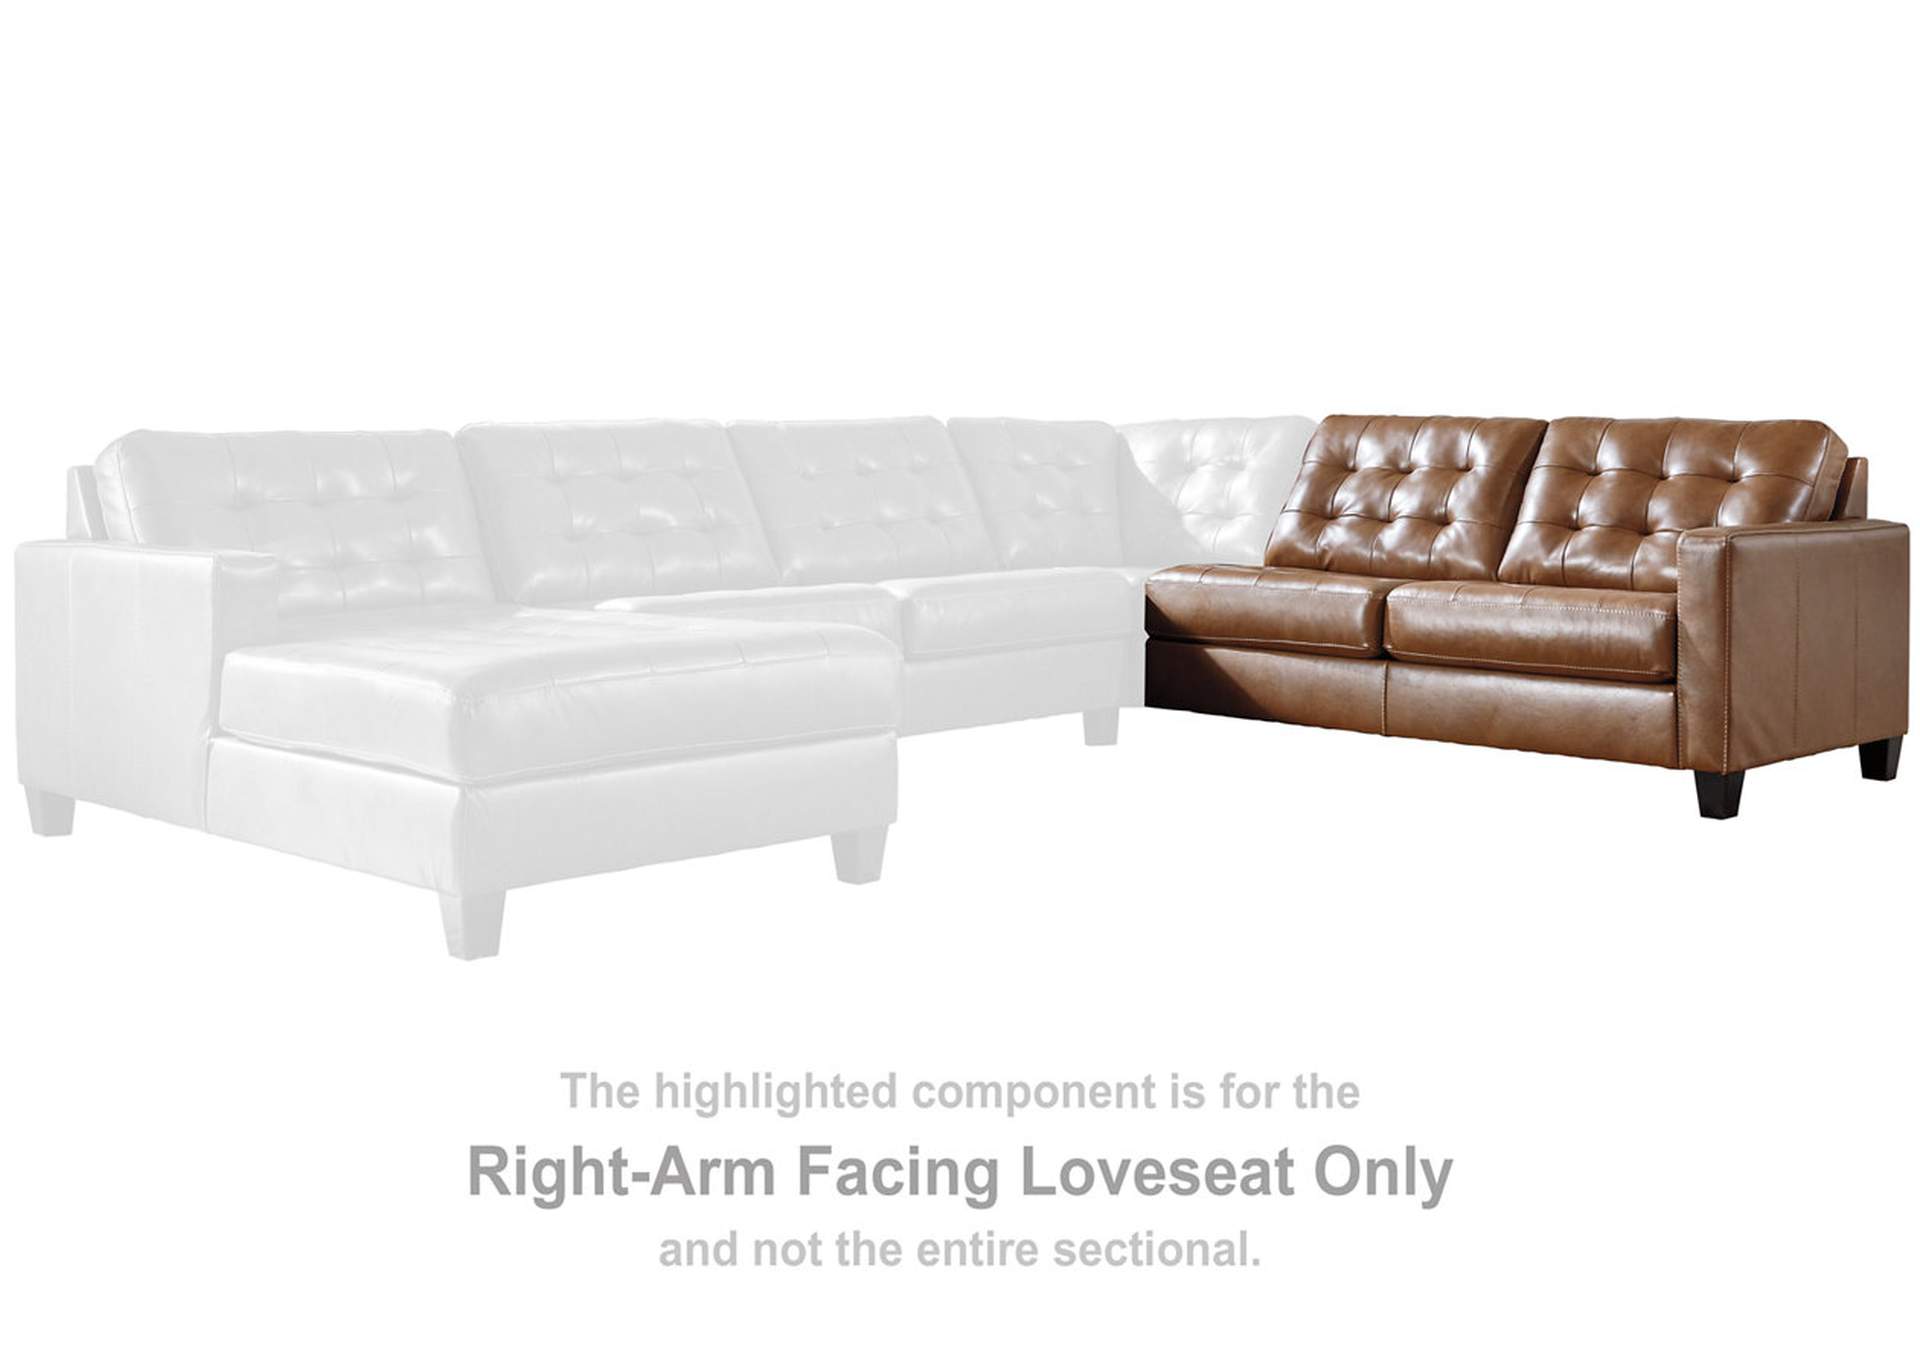 Baskove Right-Arm Facing Loveseat,Signature Design By Ashley